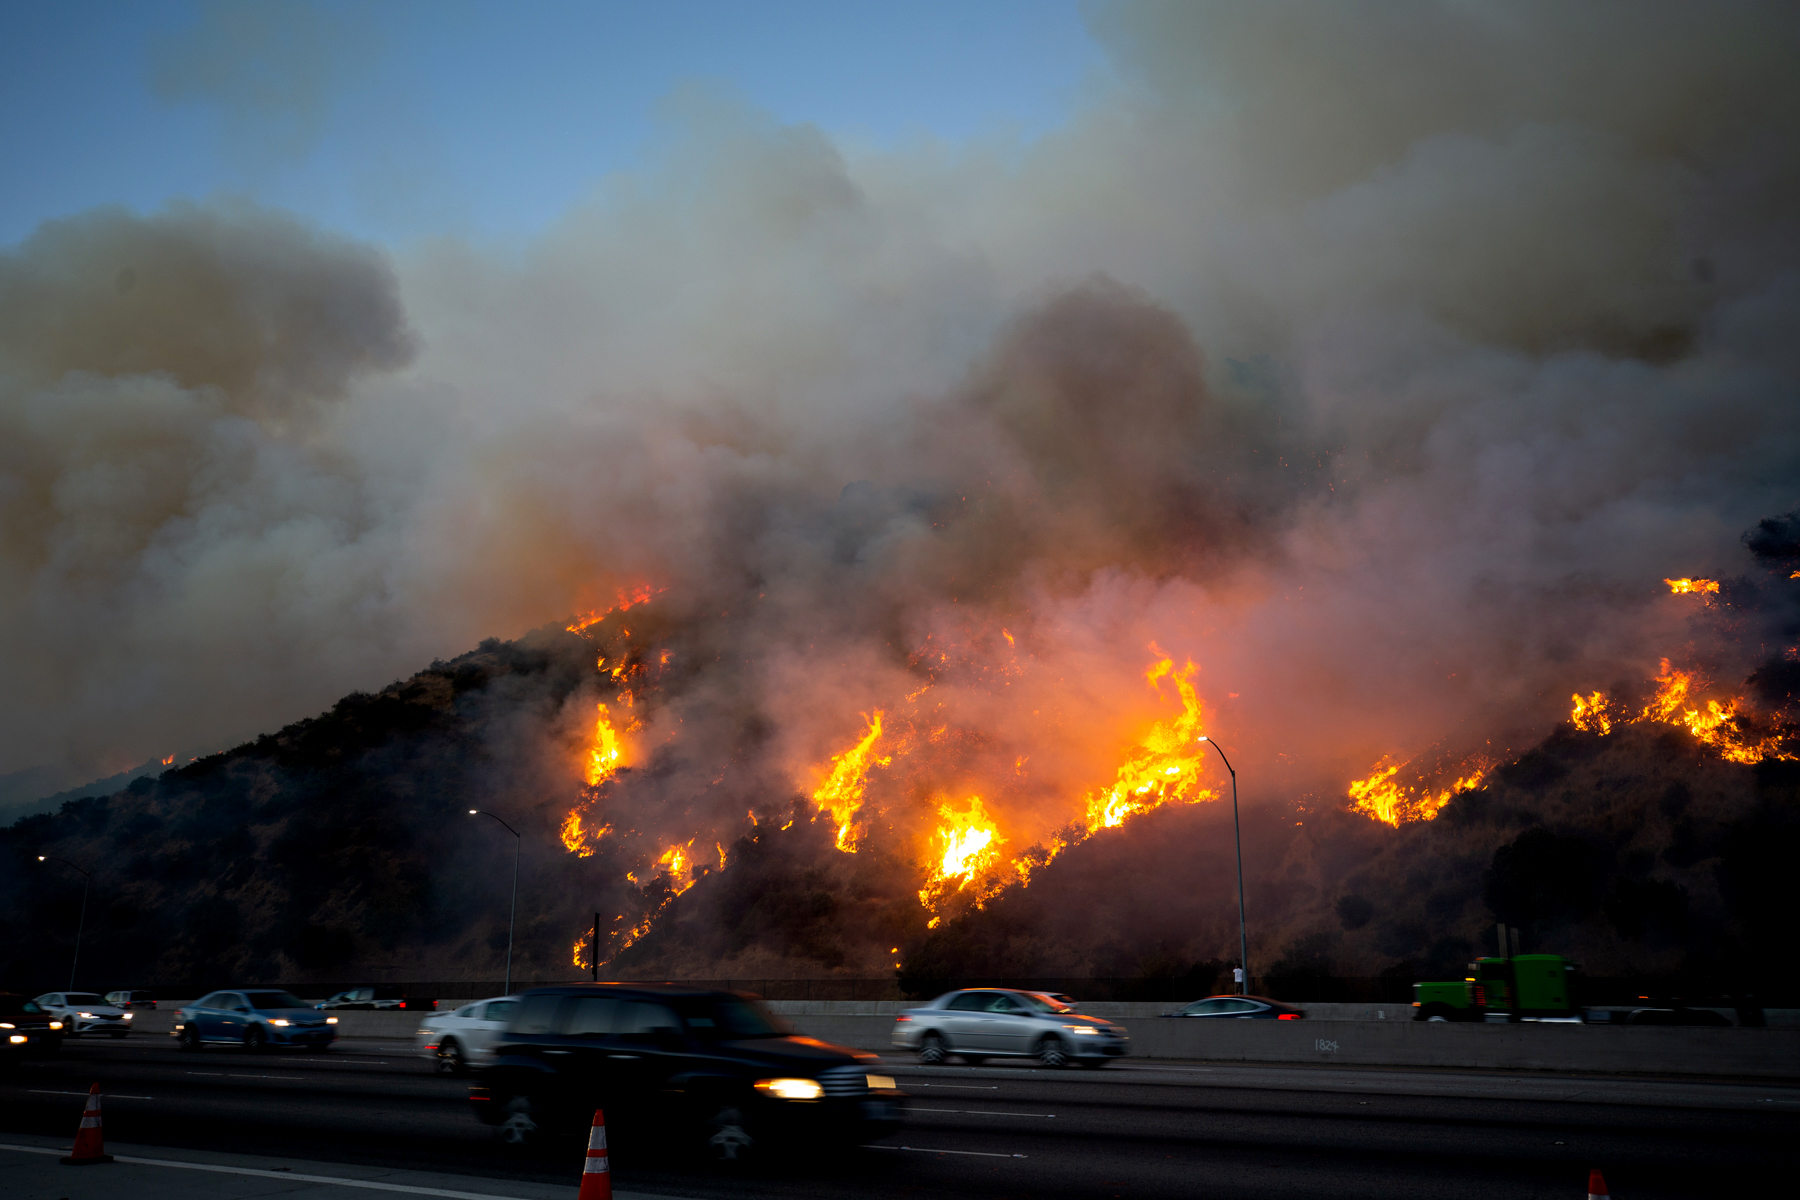 PHOTO: The Getty fire in Los Angeles, Oct. 28, 2019.